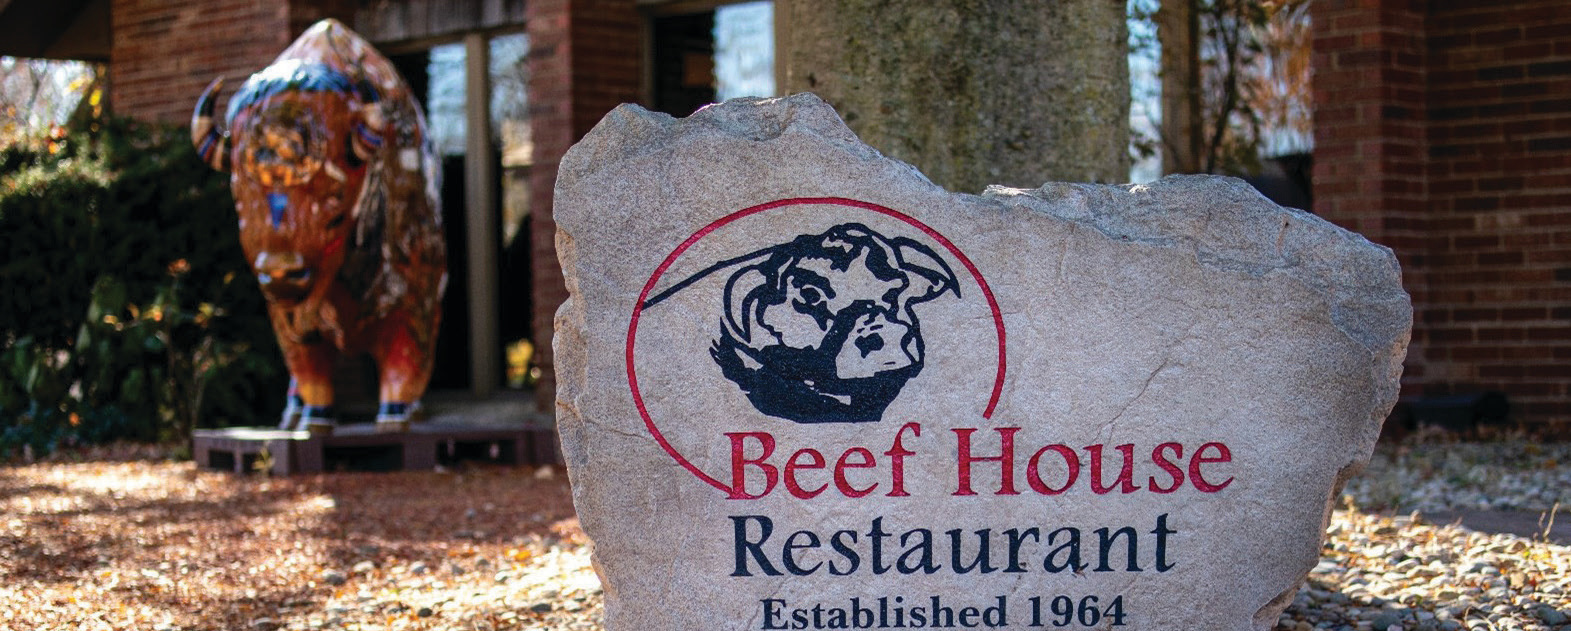 The Beef House in Covington